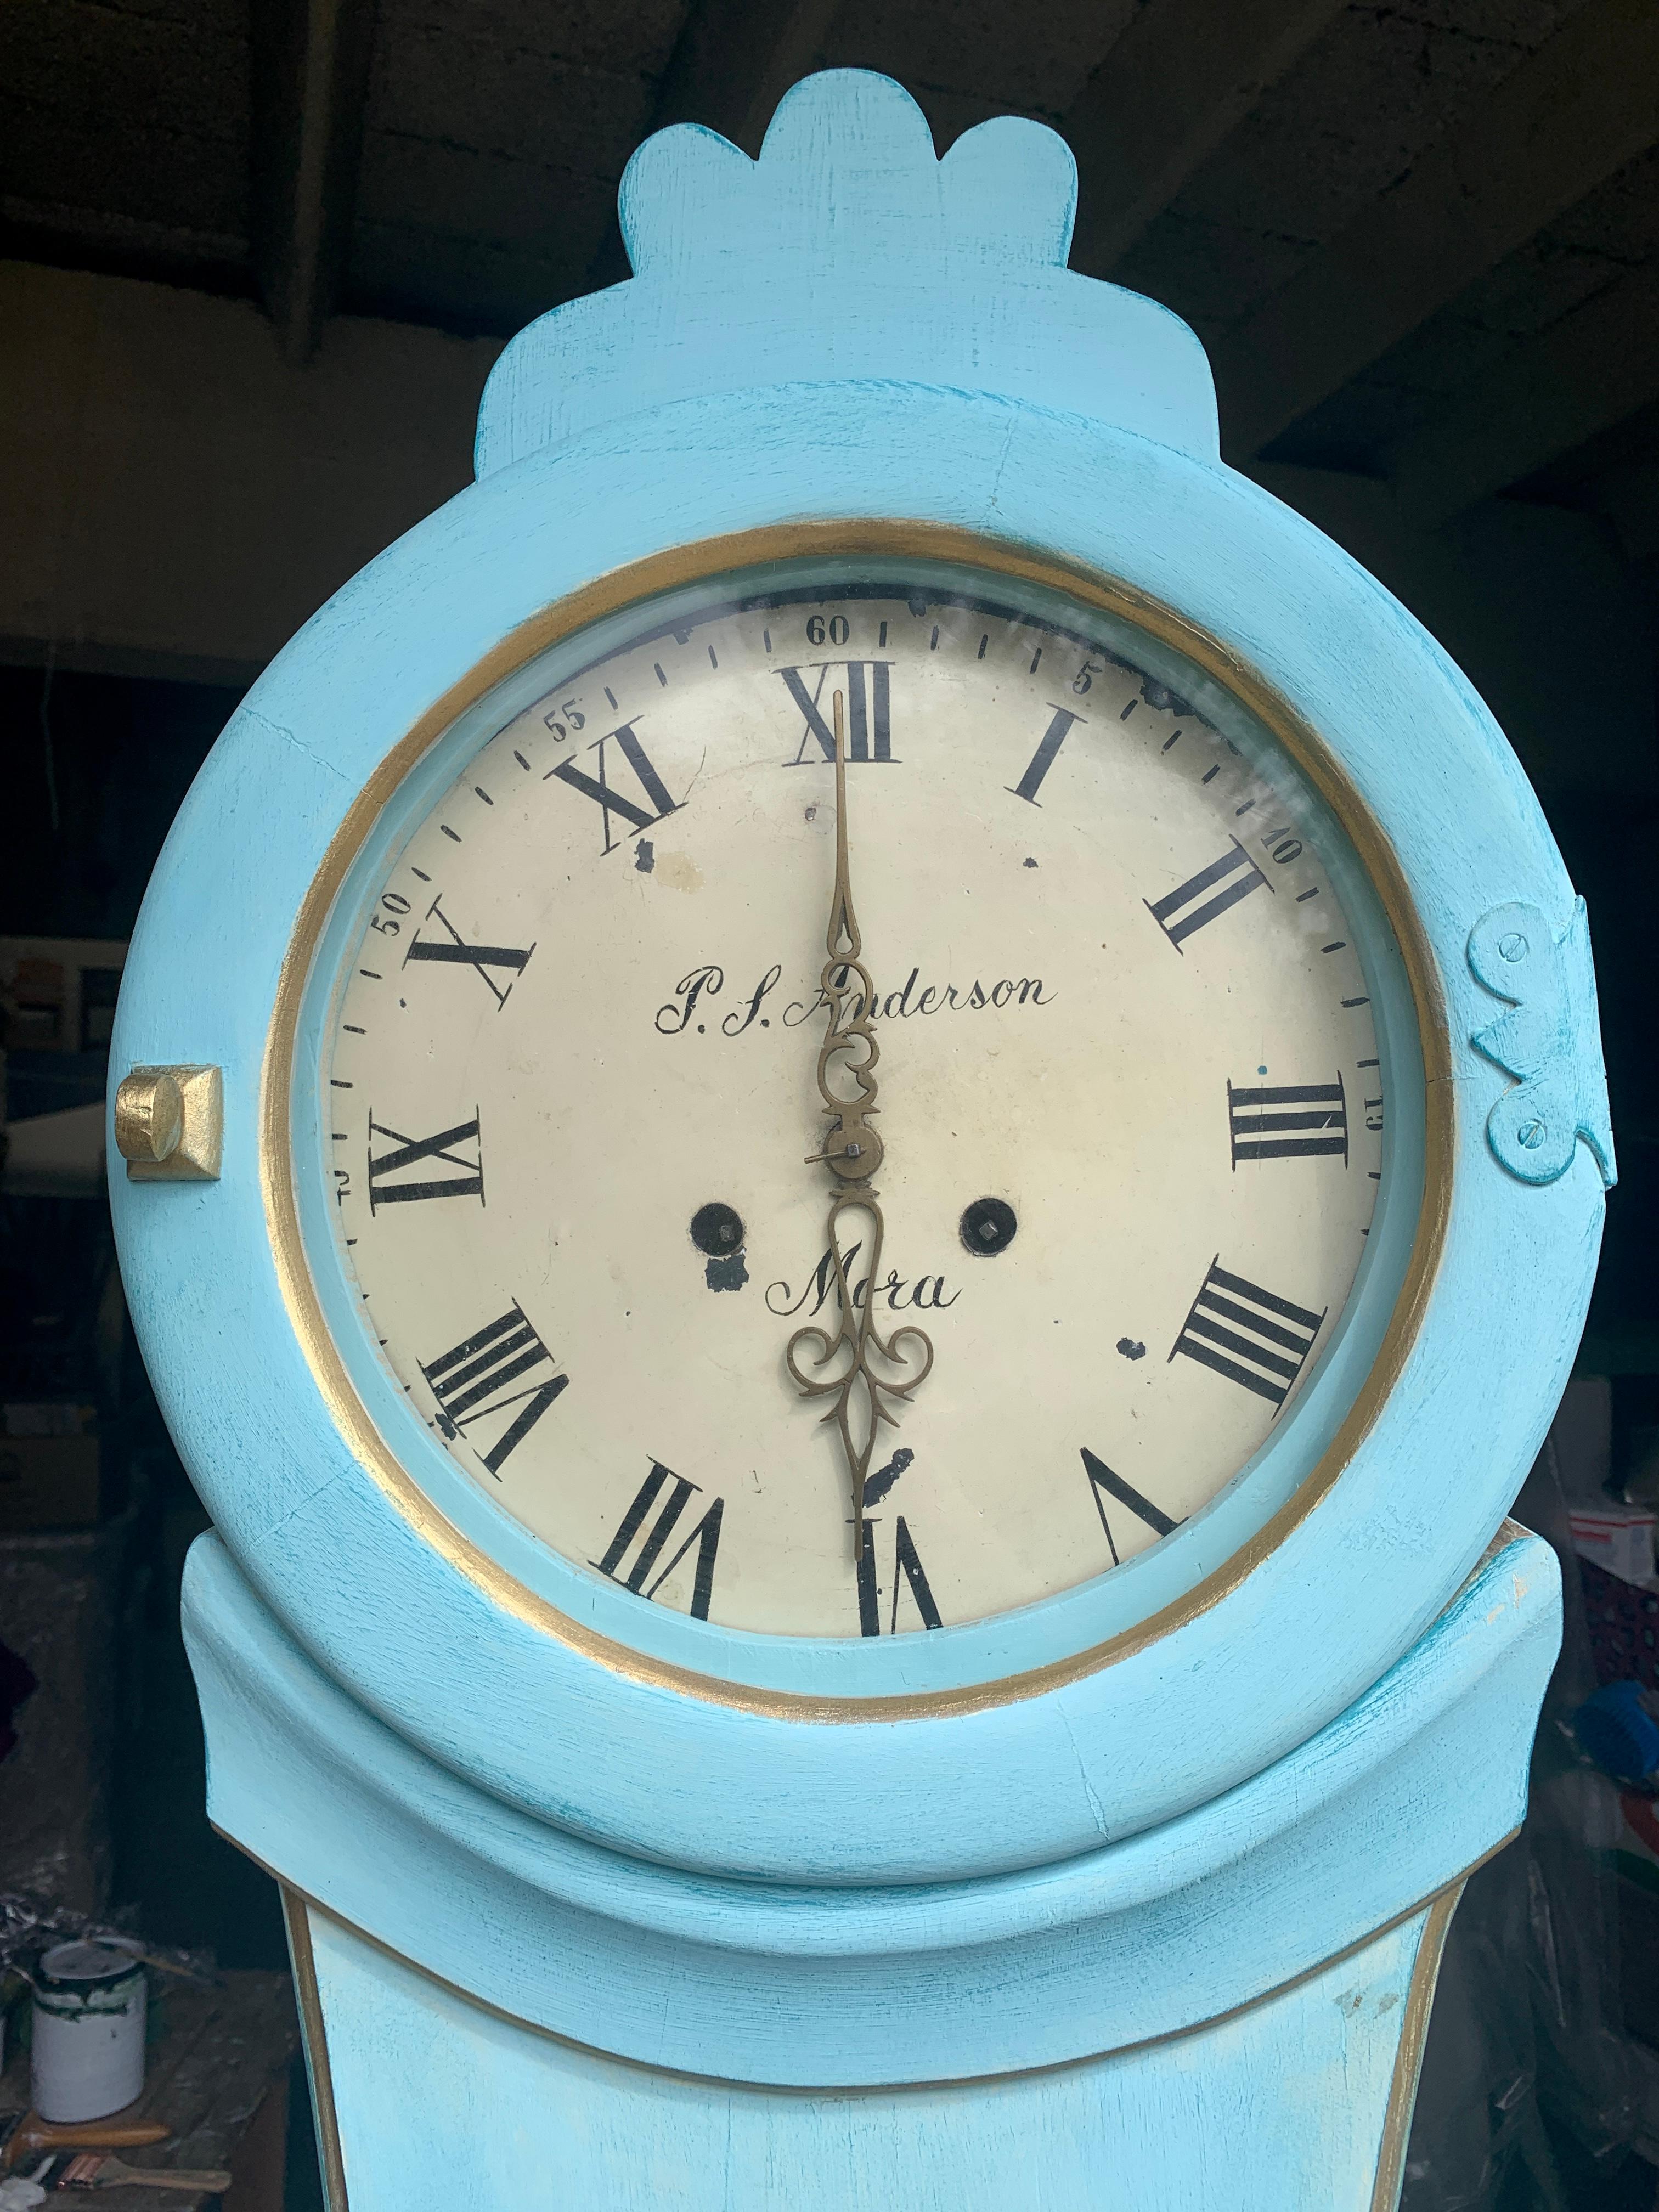 Antique Swedish mora clock from the 1800s in lovely Pale Blue finish and gold detailing with a simple shape body and a superb detailed roman numeral face with P J Anderson Mora initials in good condition. Measures: 210 cm.

It has the classic